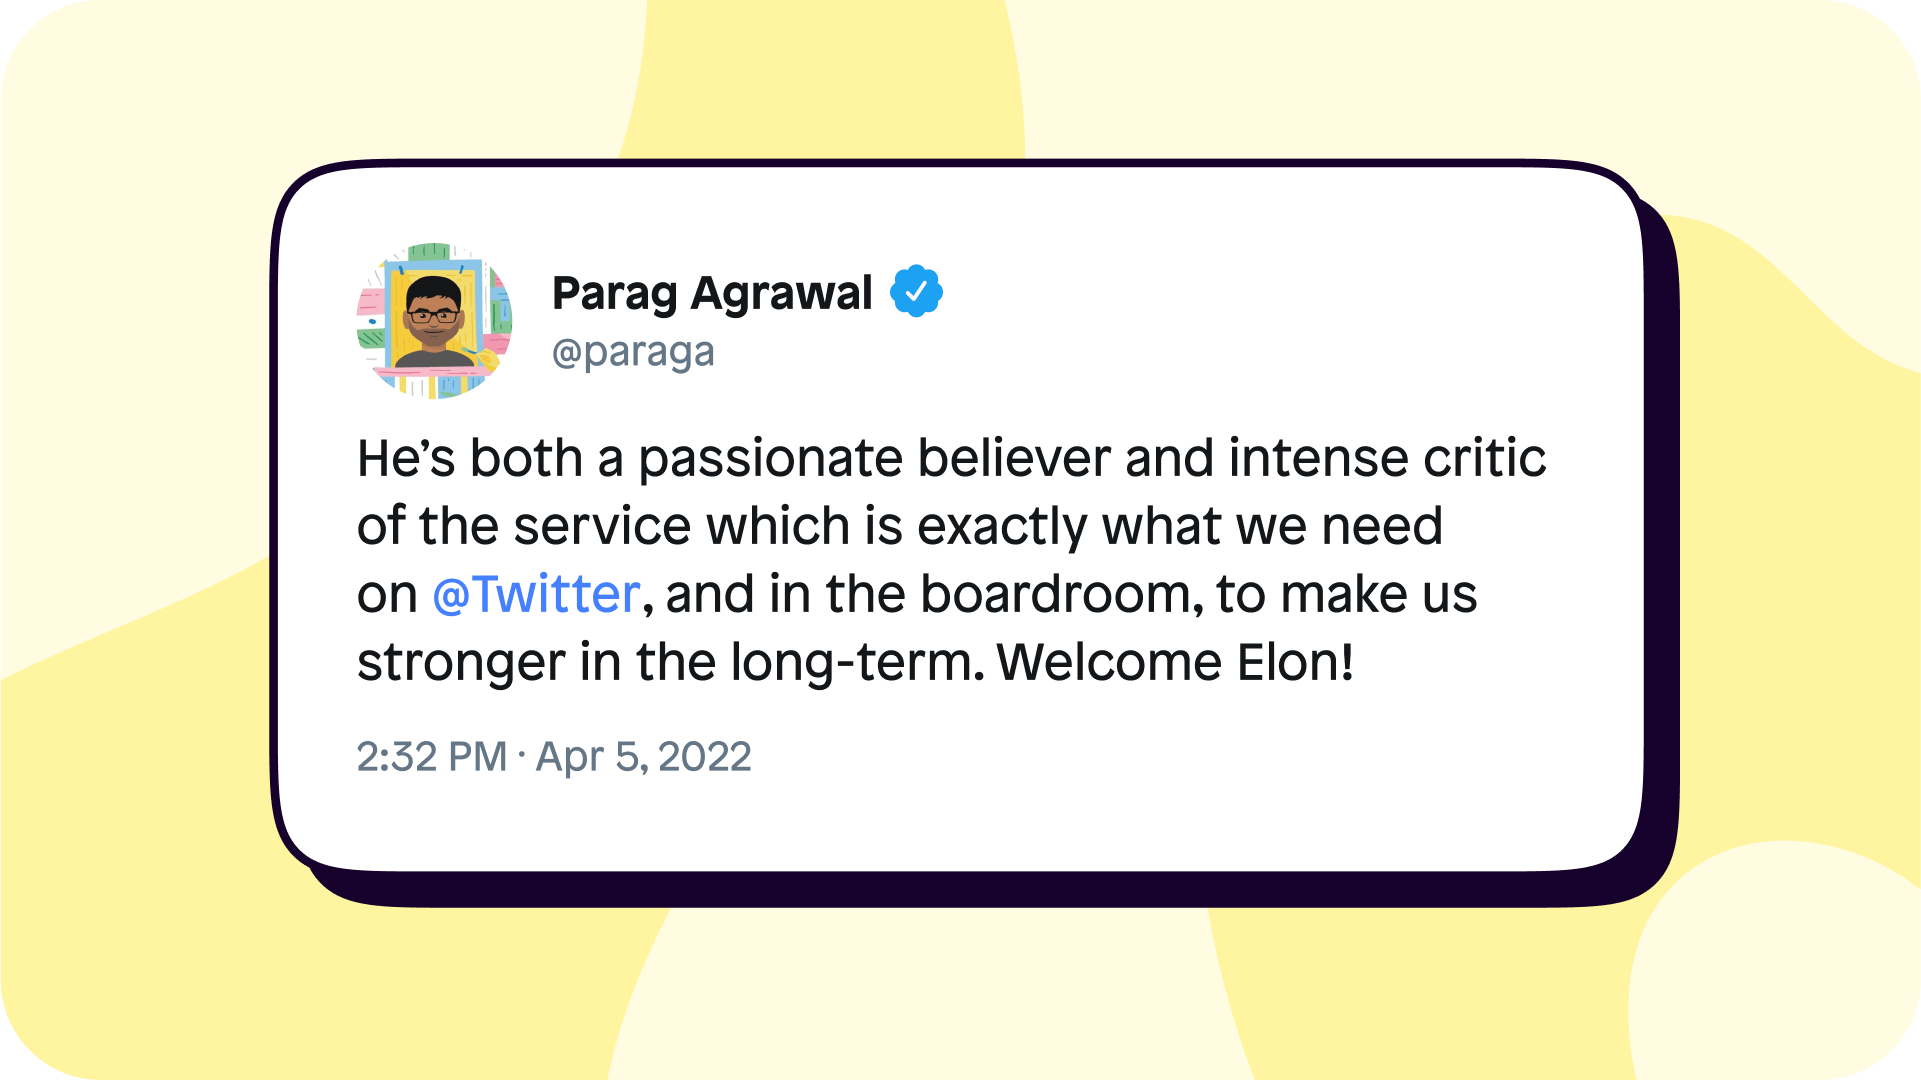 Twitter CEO, Parag Agrawal, tweets to welcome Elon Musk aboard